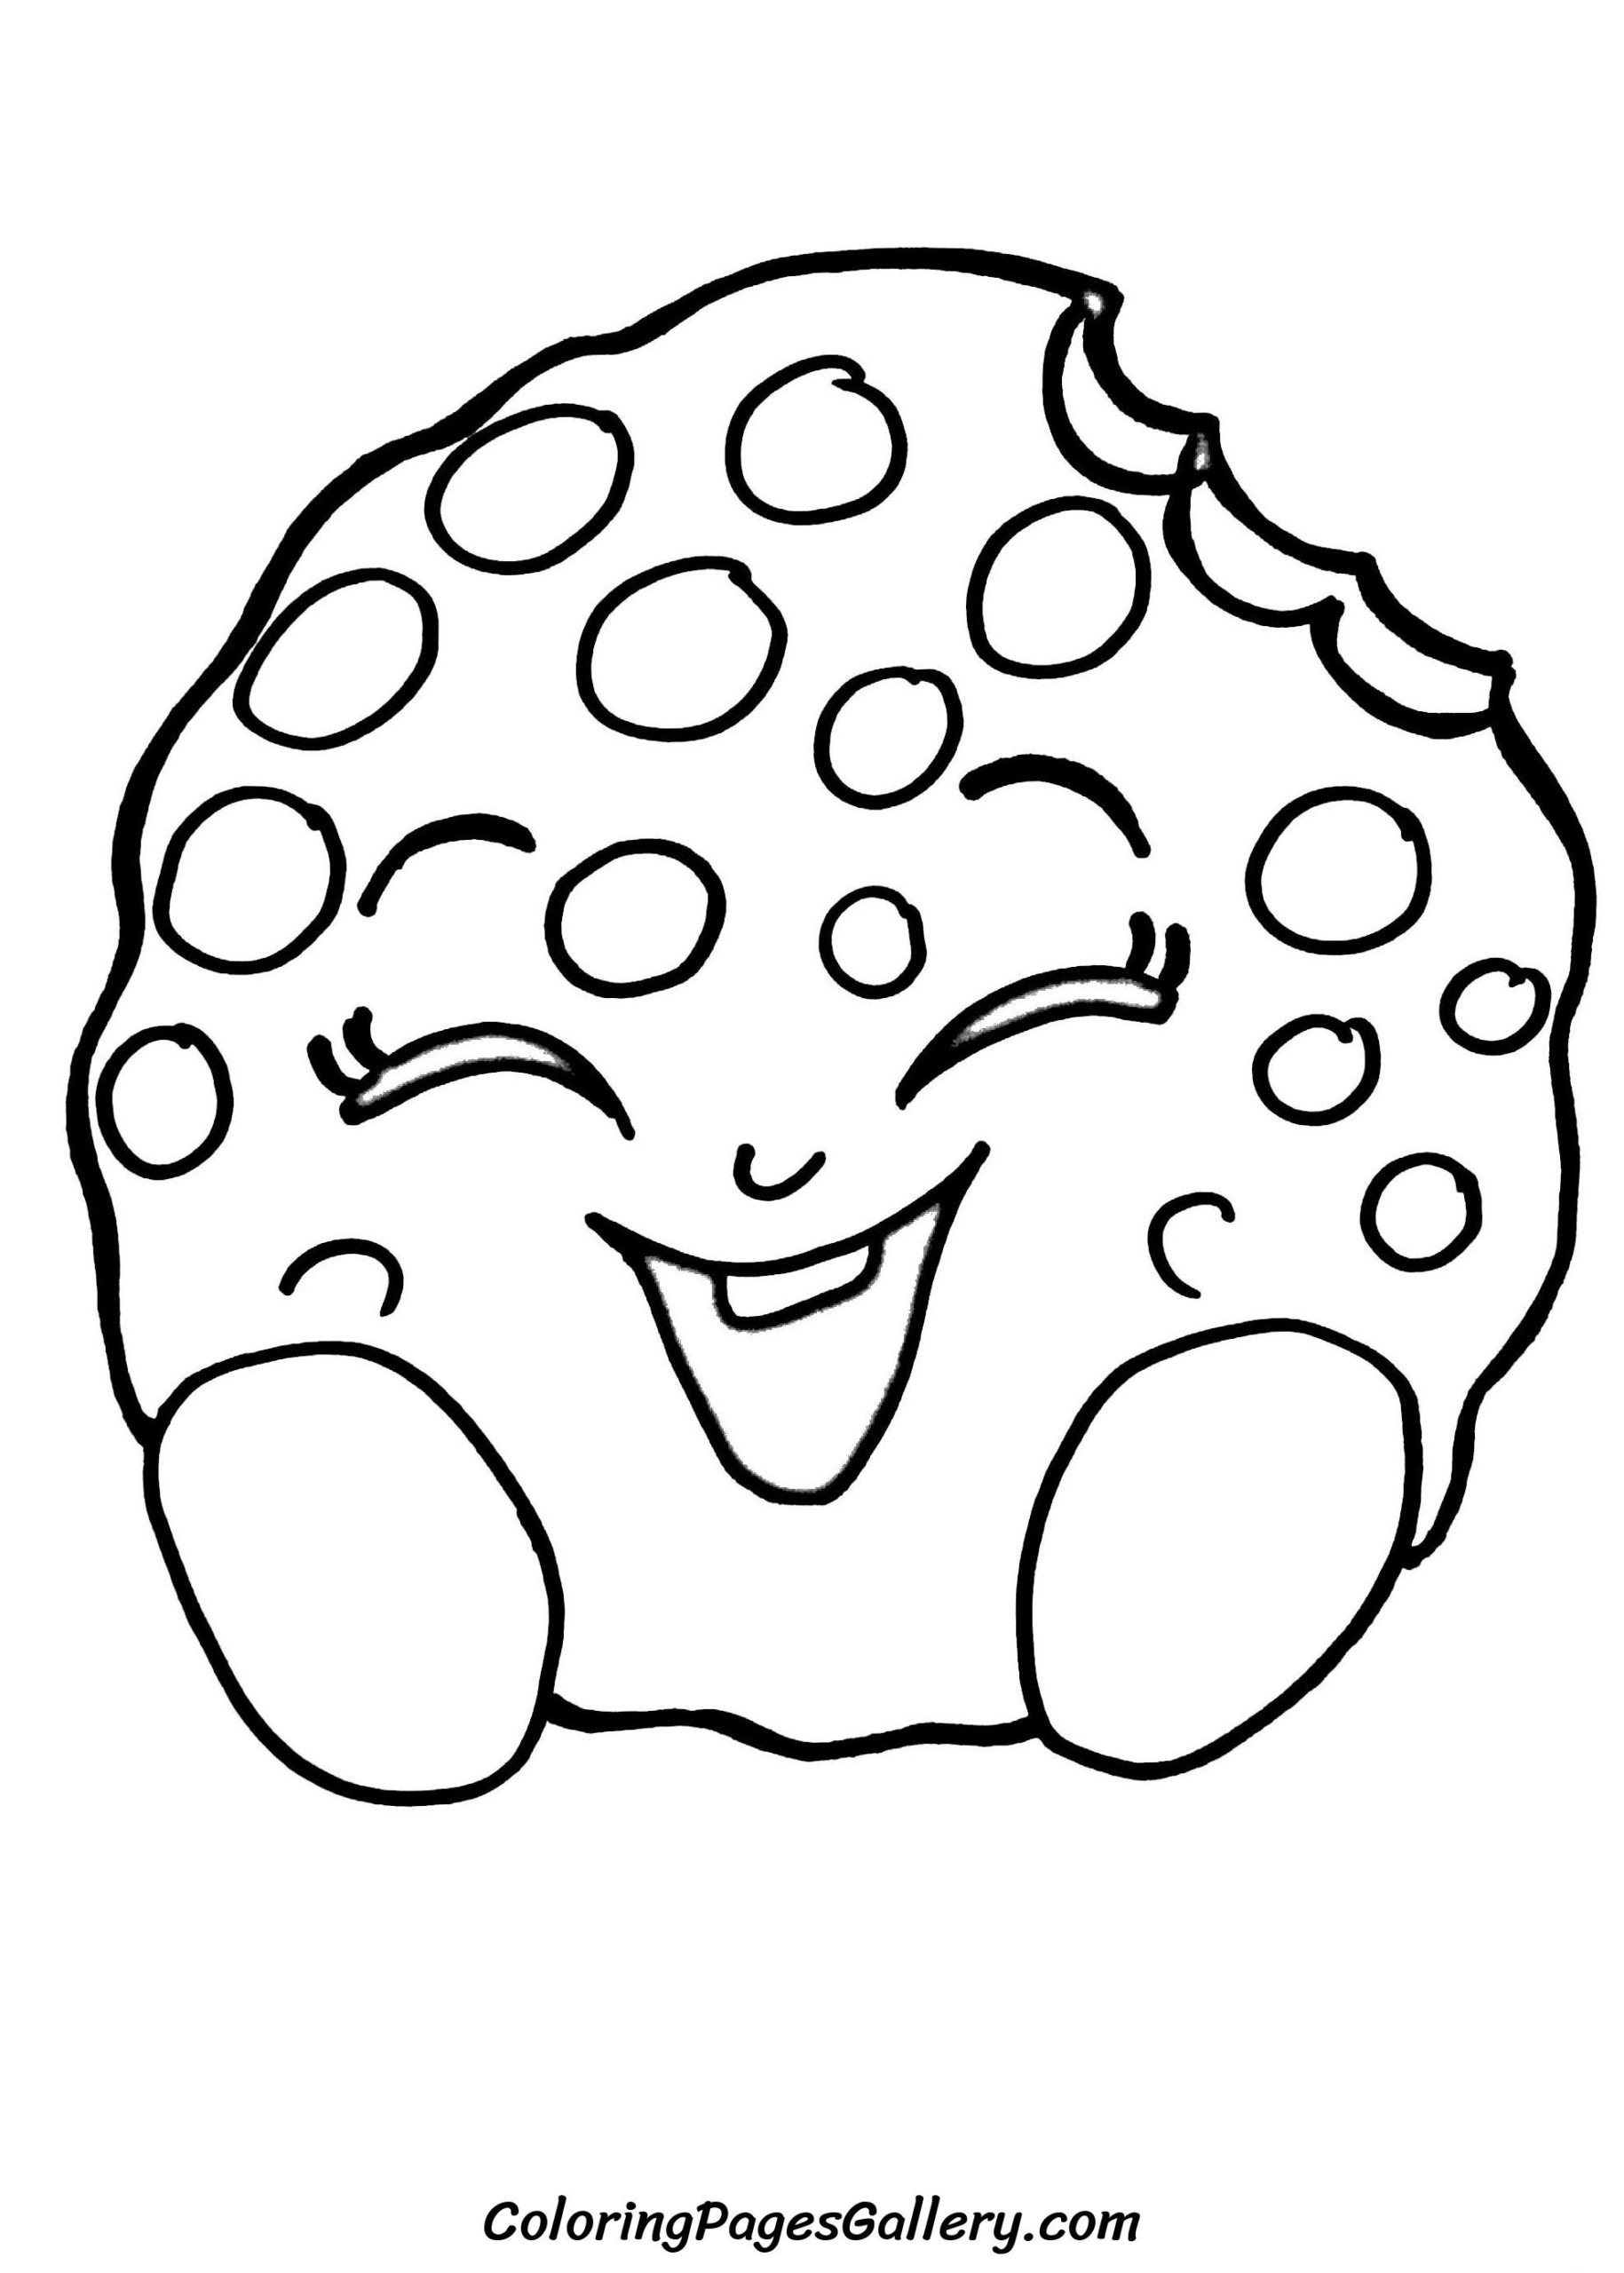 Coloring Pages  Easy Shopkins Coloring Donut Printable Pdf Sheet ...